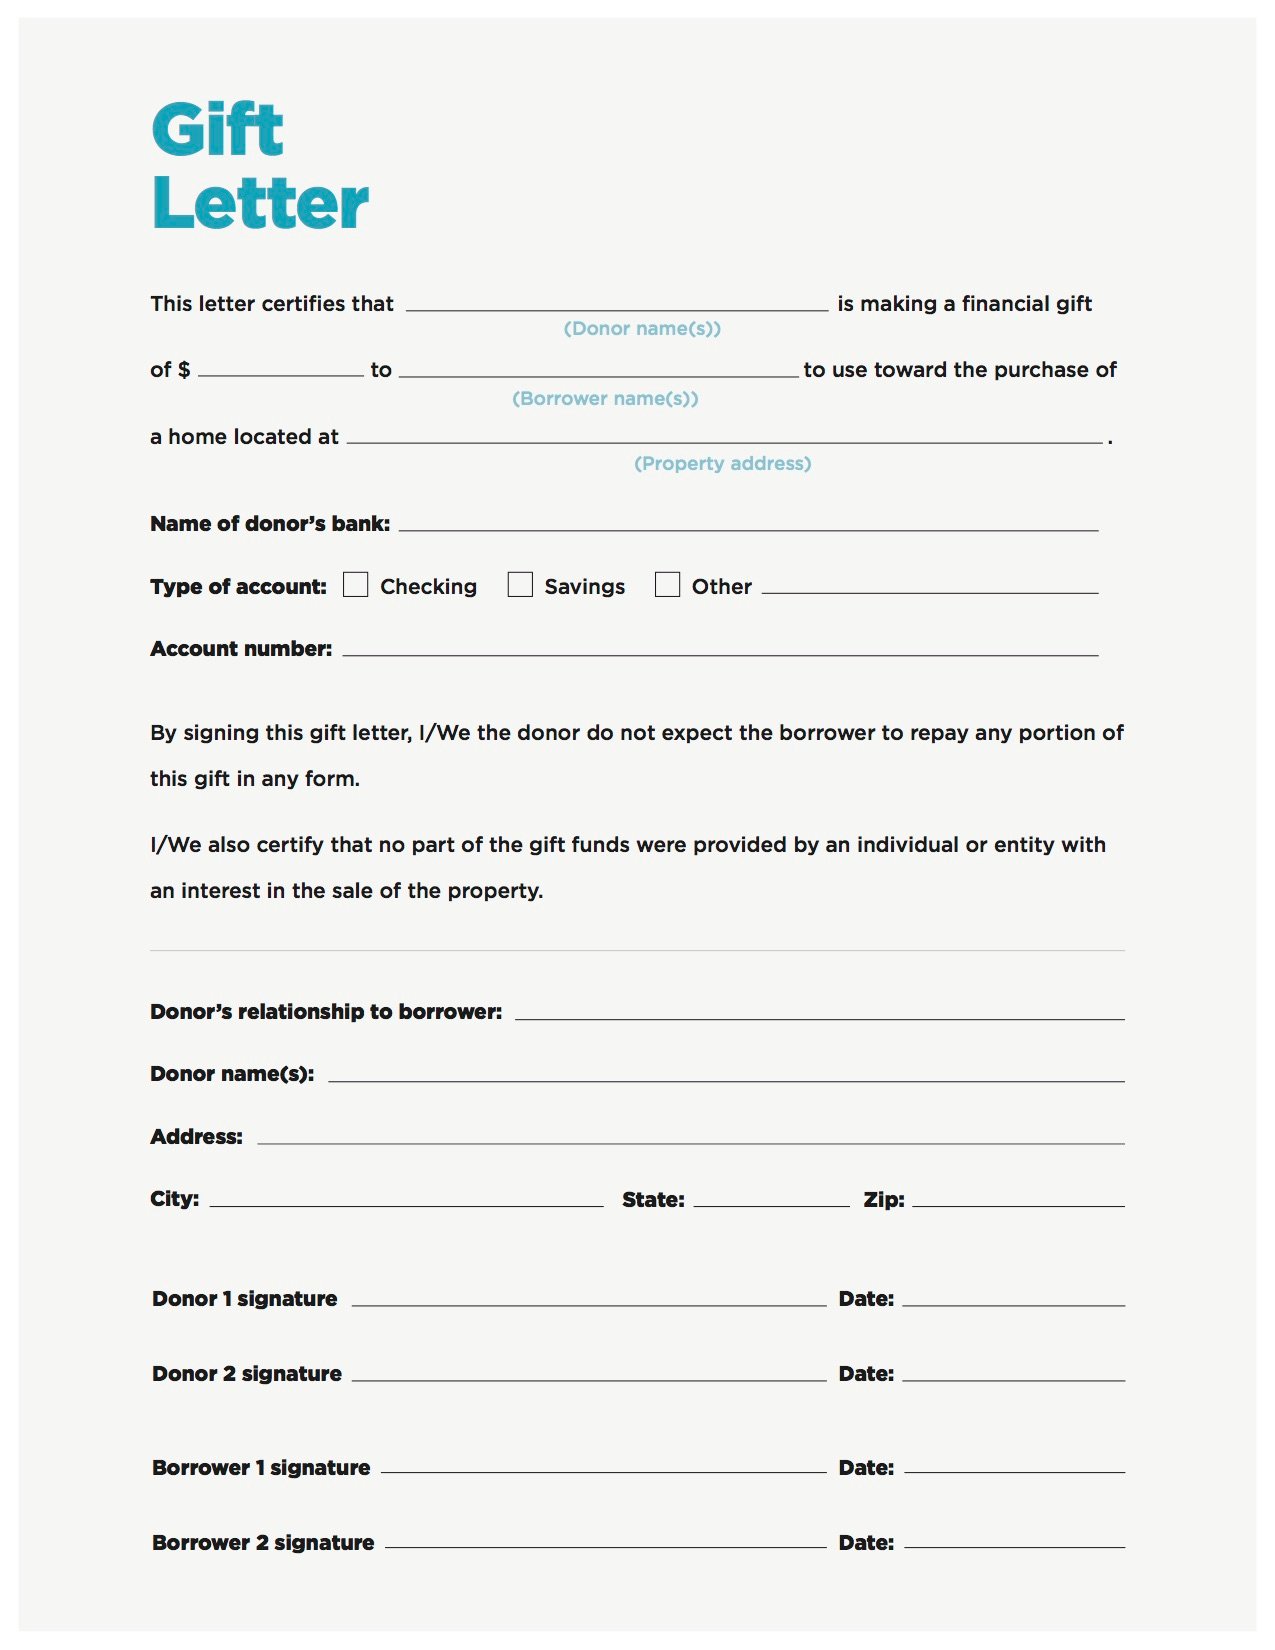 Gift Letter For Mortgage Template from www.nerdwallet.com